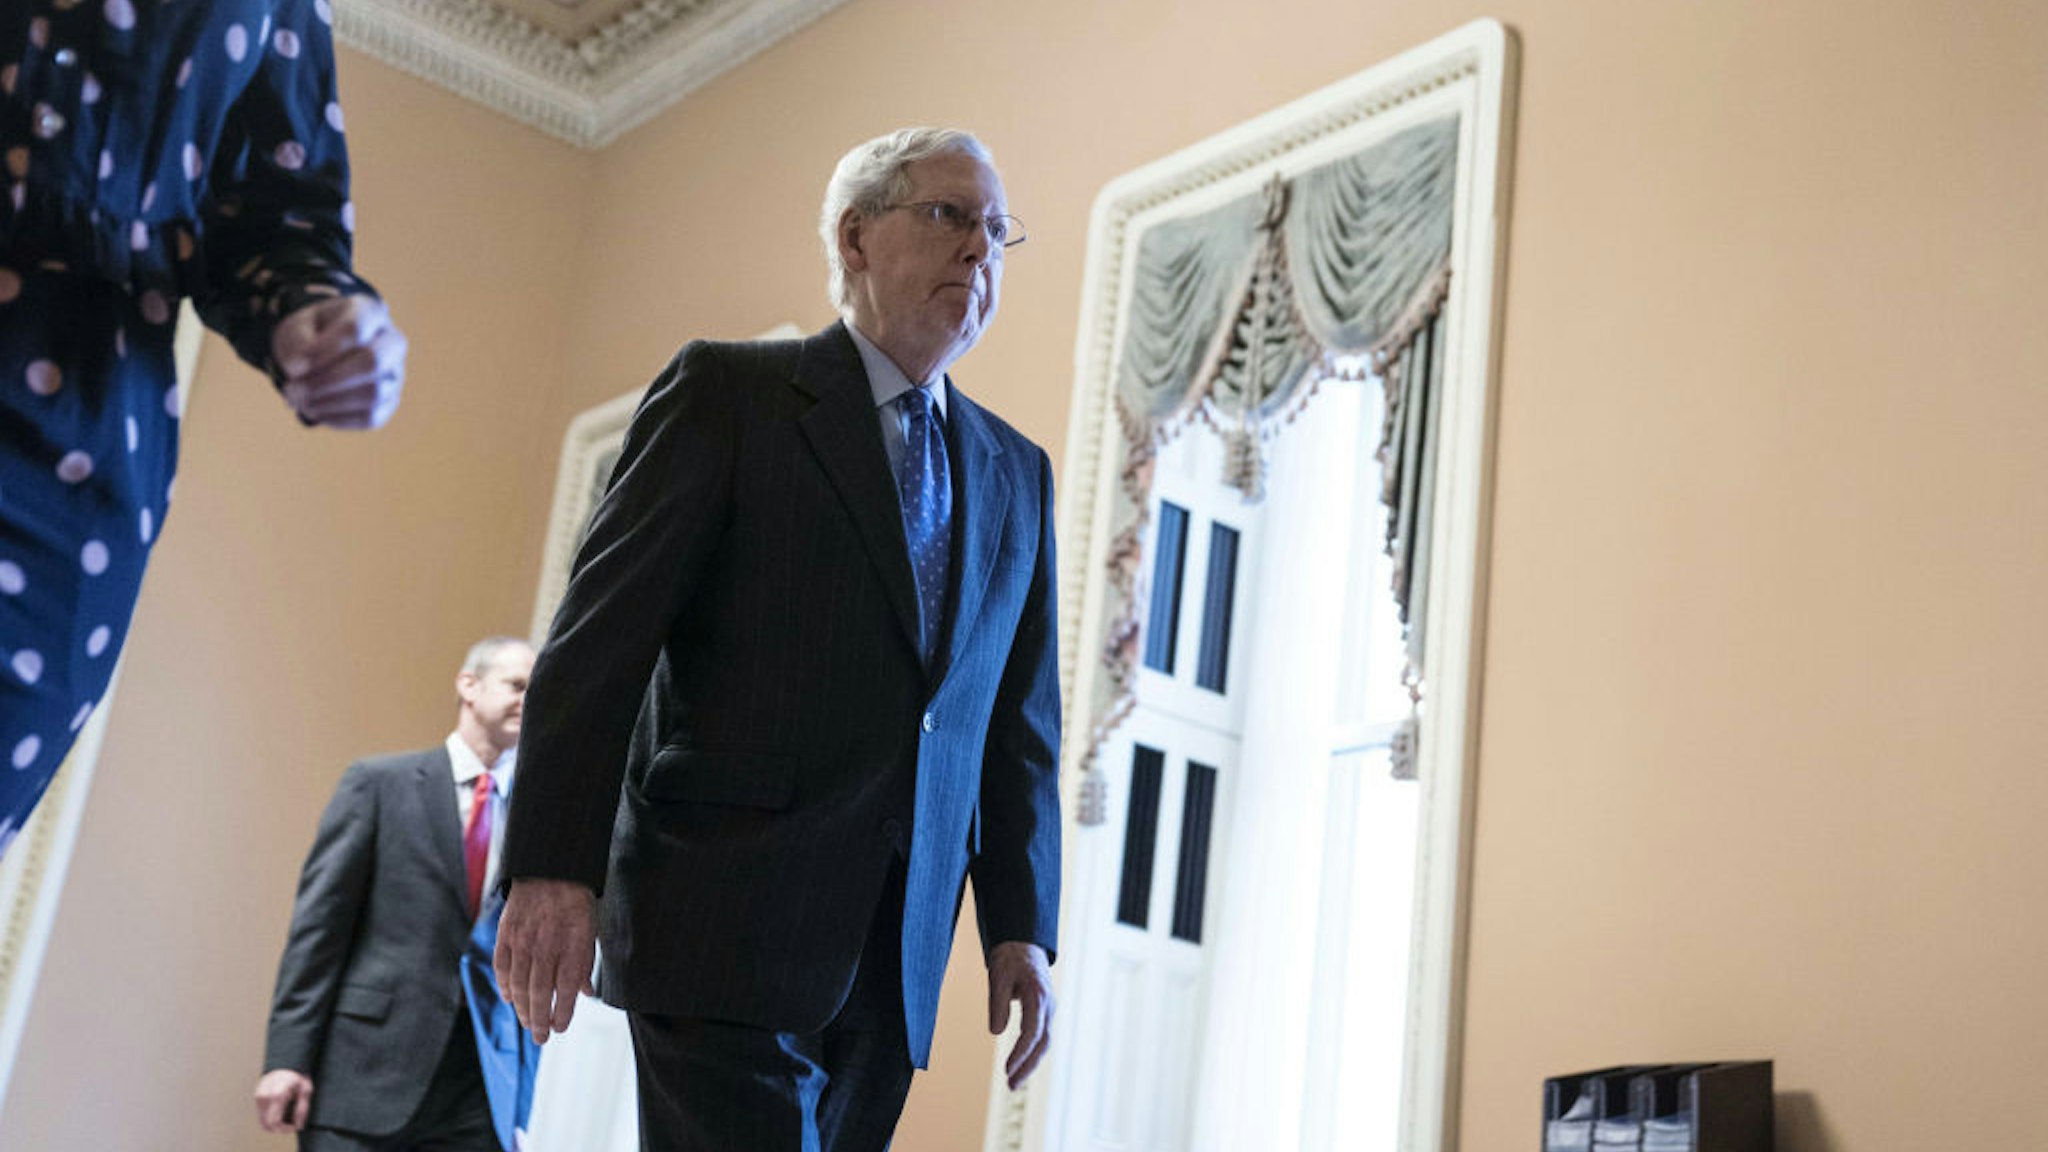 Senate Majority Leader Mitch McConnell, a Republican from Kentucky, walks through the U.S. Capitol in Washington, D.C., U.S., on Tuesday, March 24, 2020.